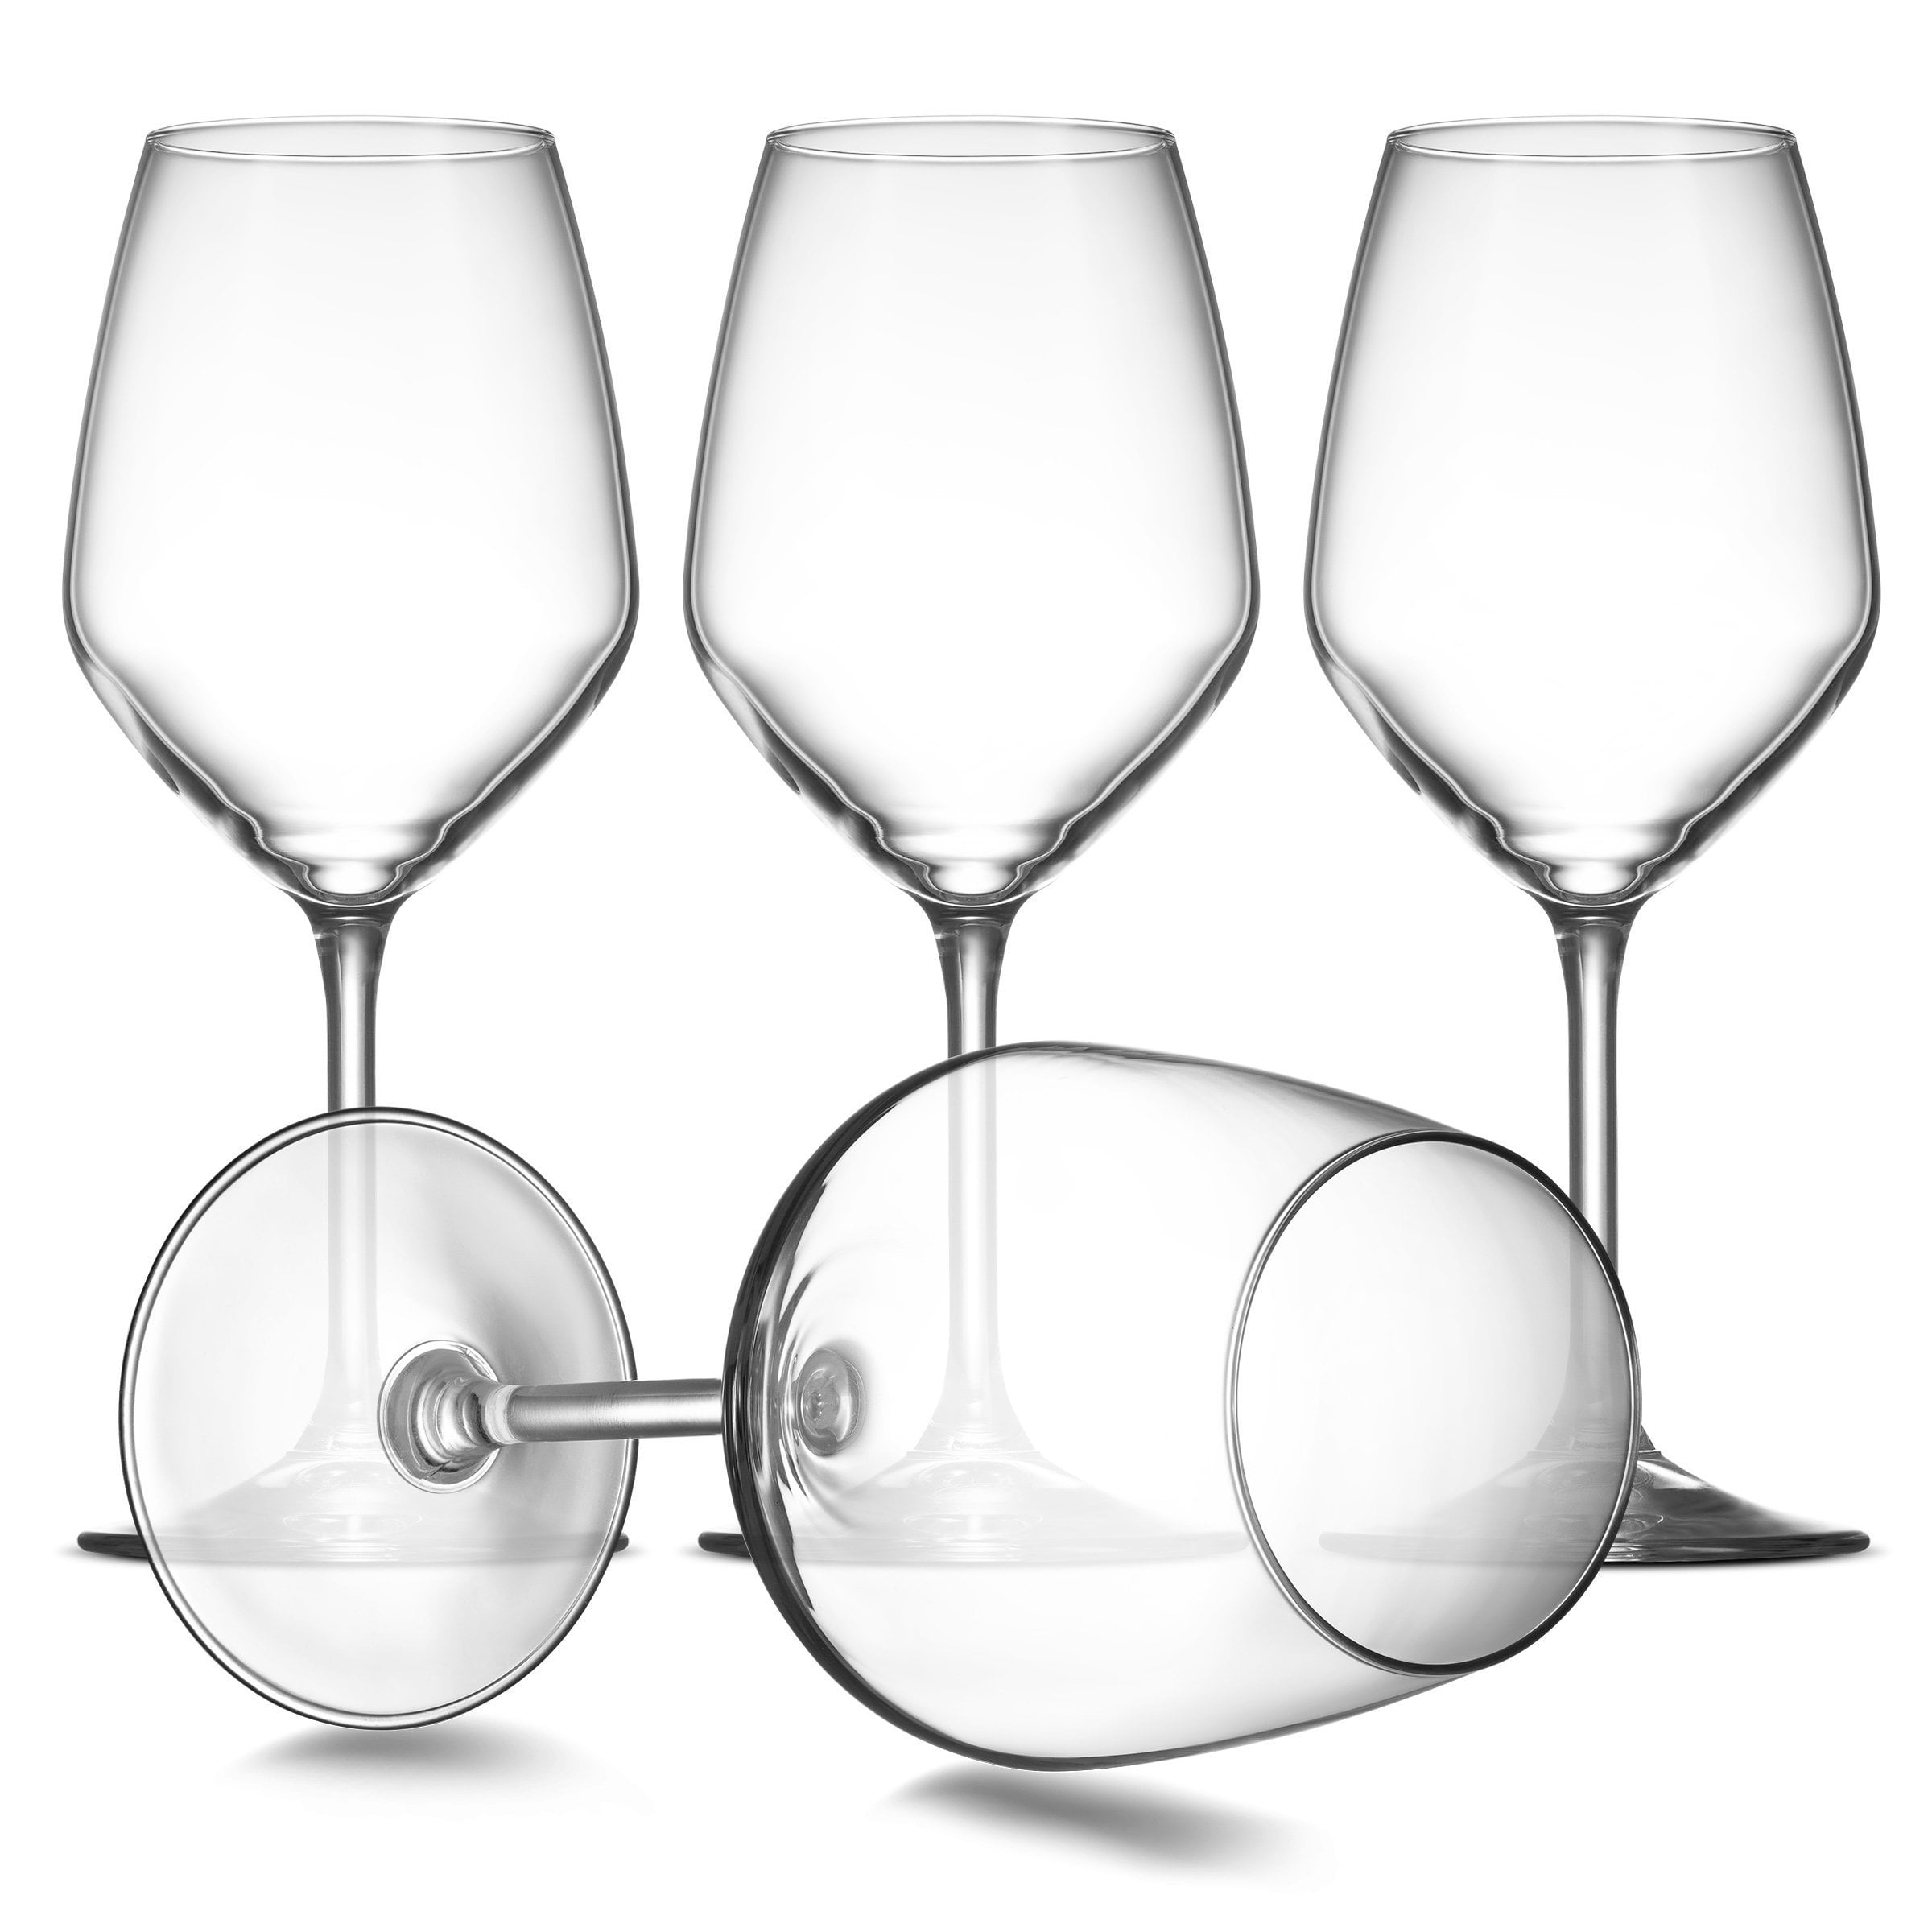 15 Ounce Wine Glass Set of 4 Clear Lead Free Shatter Resistant Paksh Novelty Italian White Wine Glasses